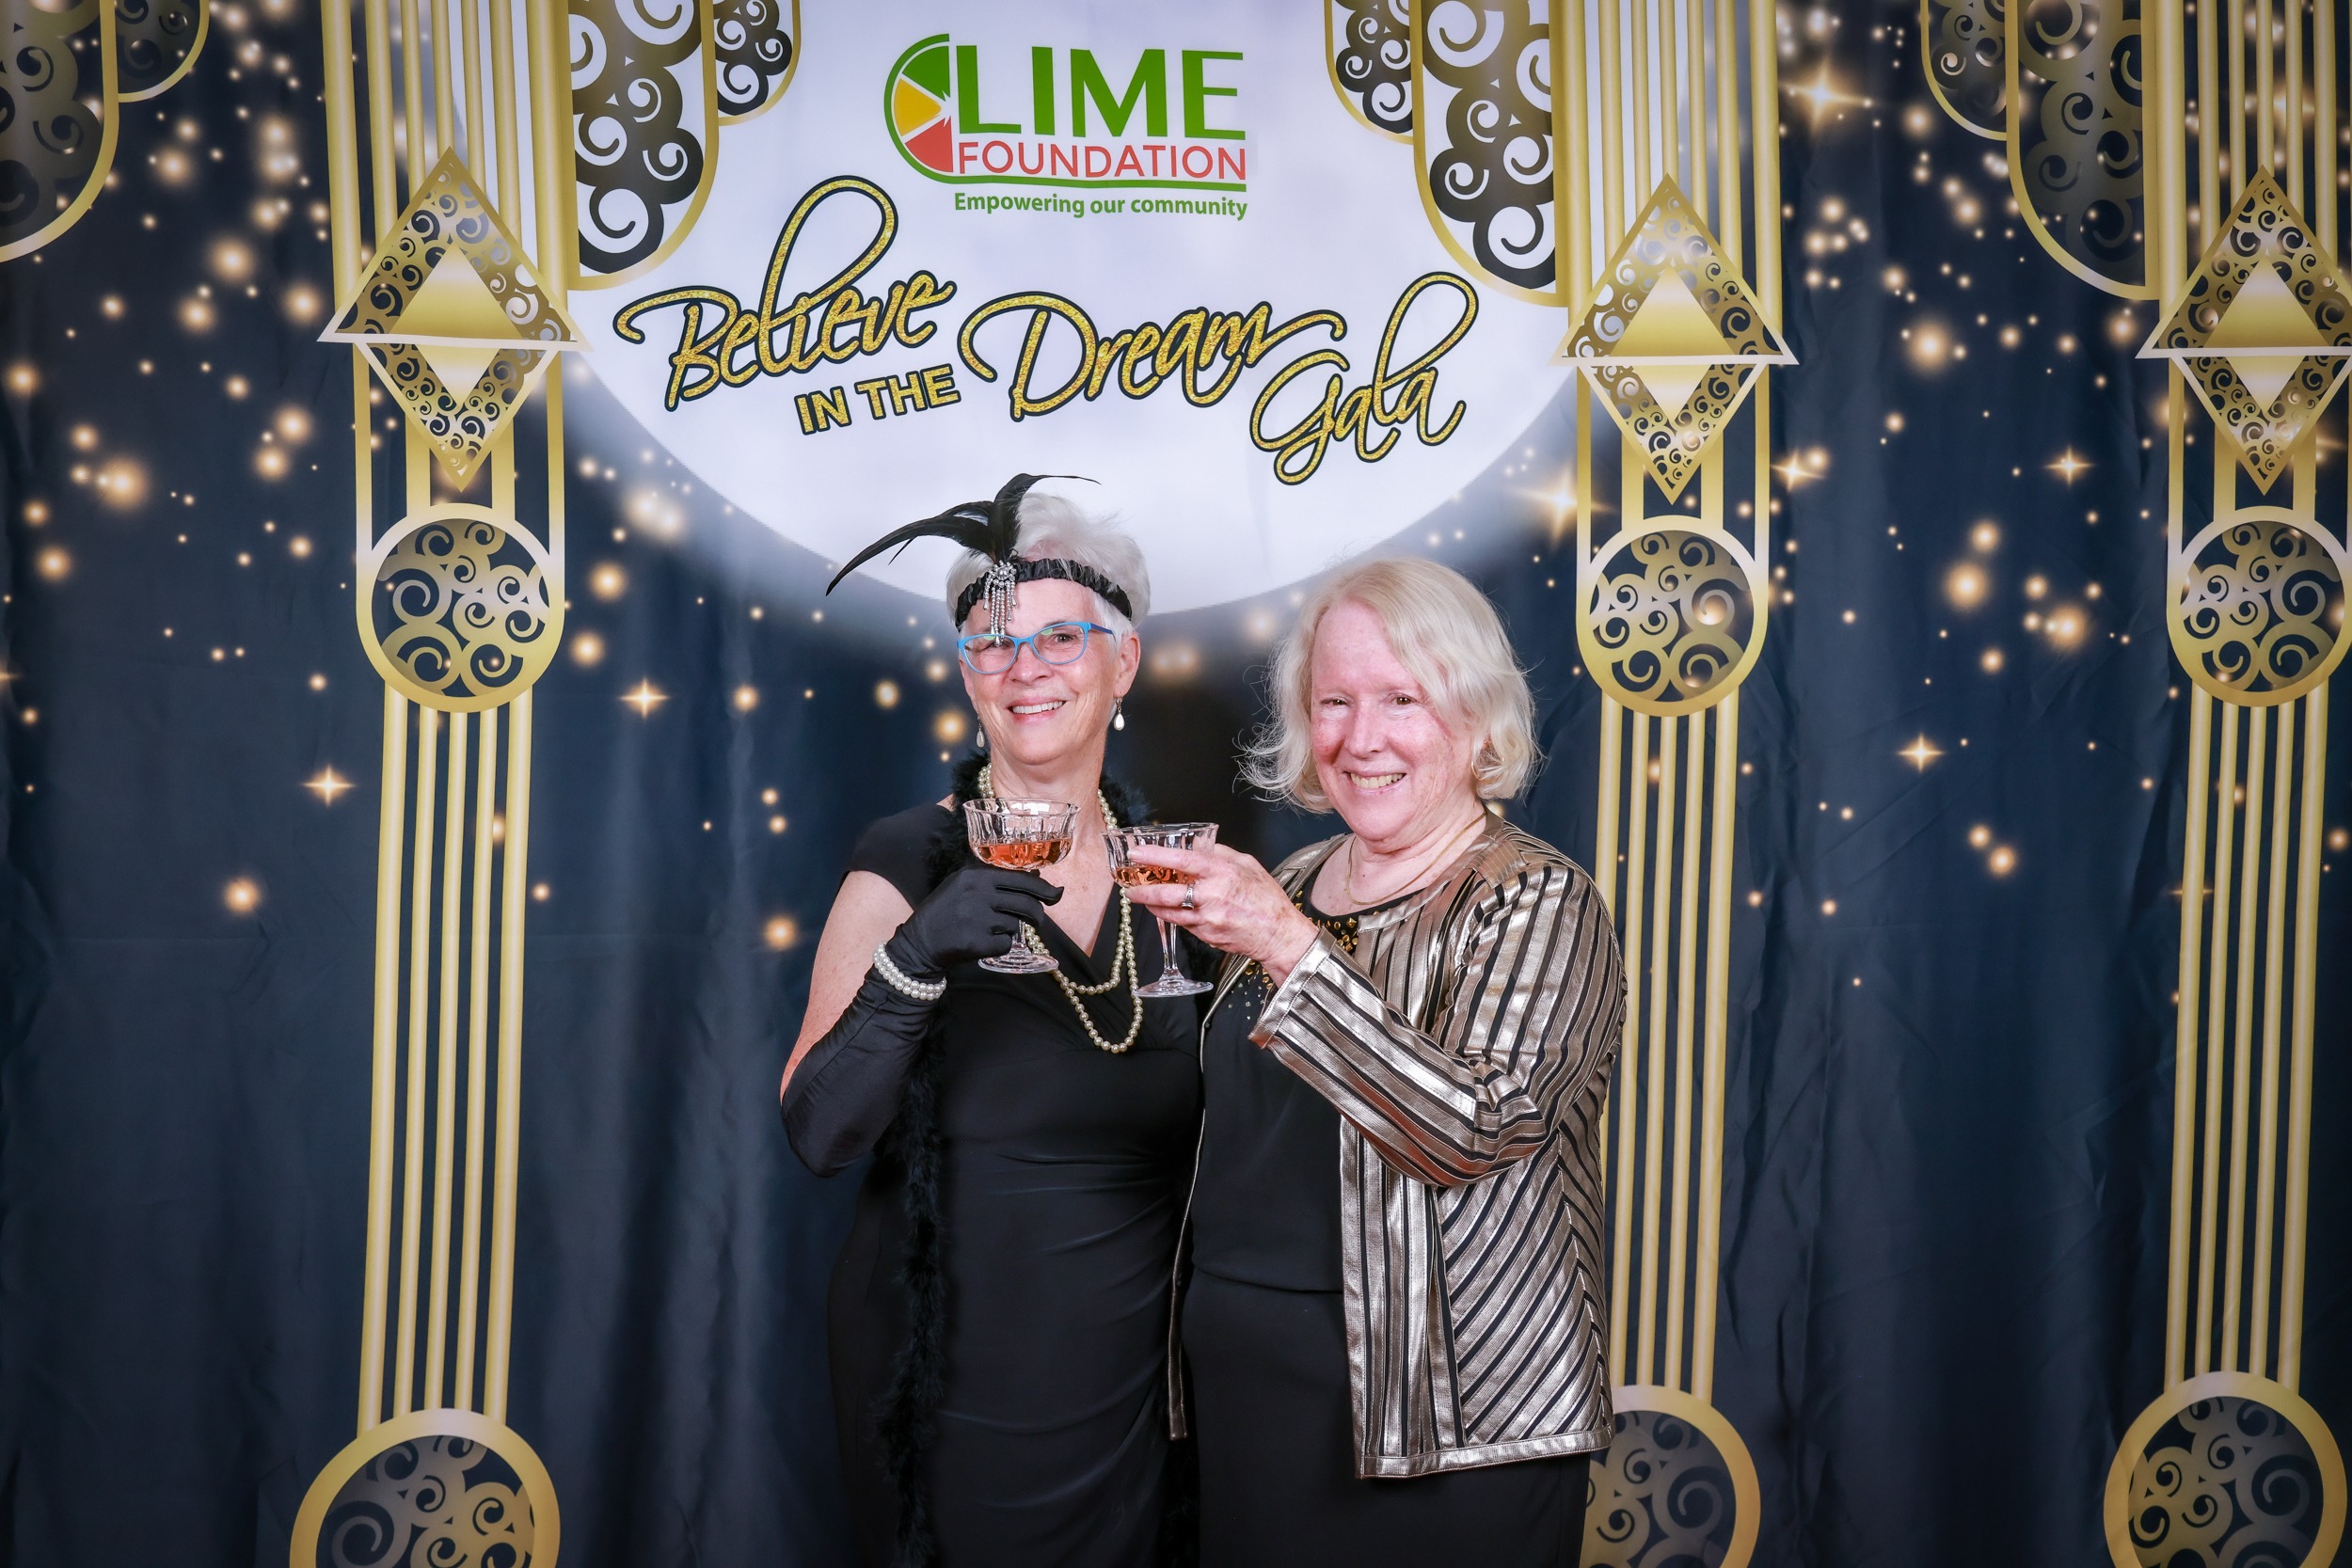 Two women posing for a photo in front of a gilded backdrop at The LIME Foundation event.